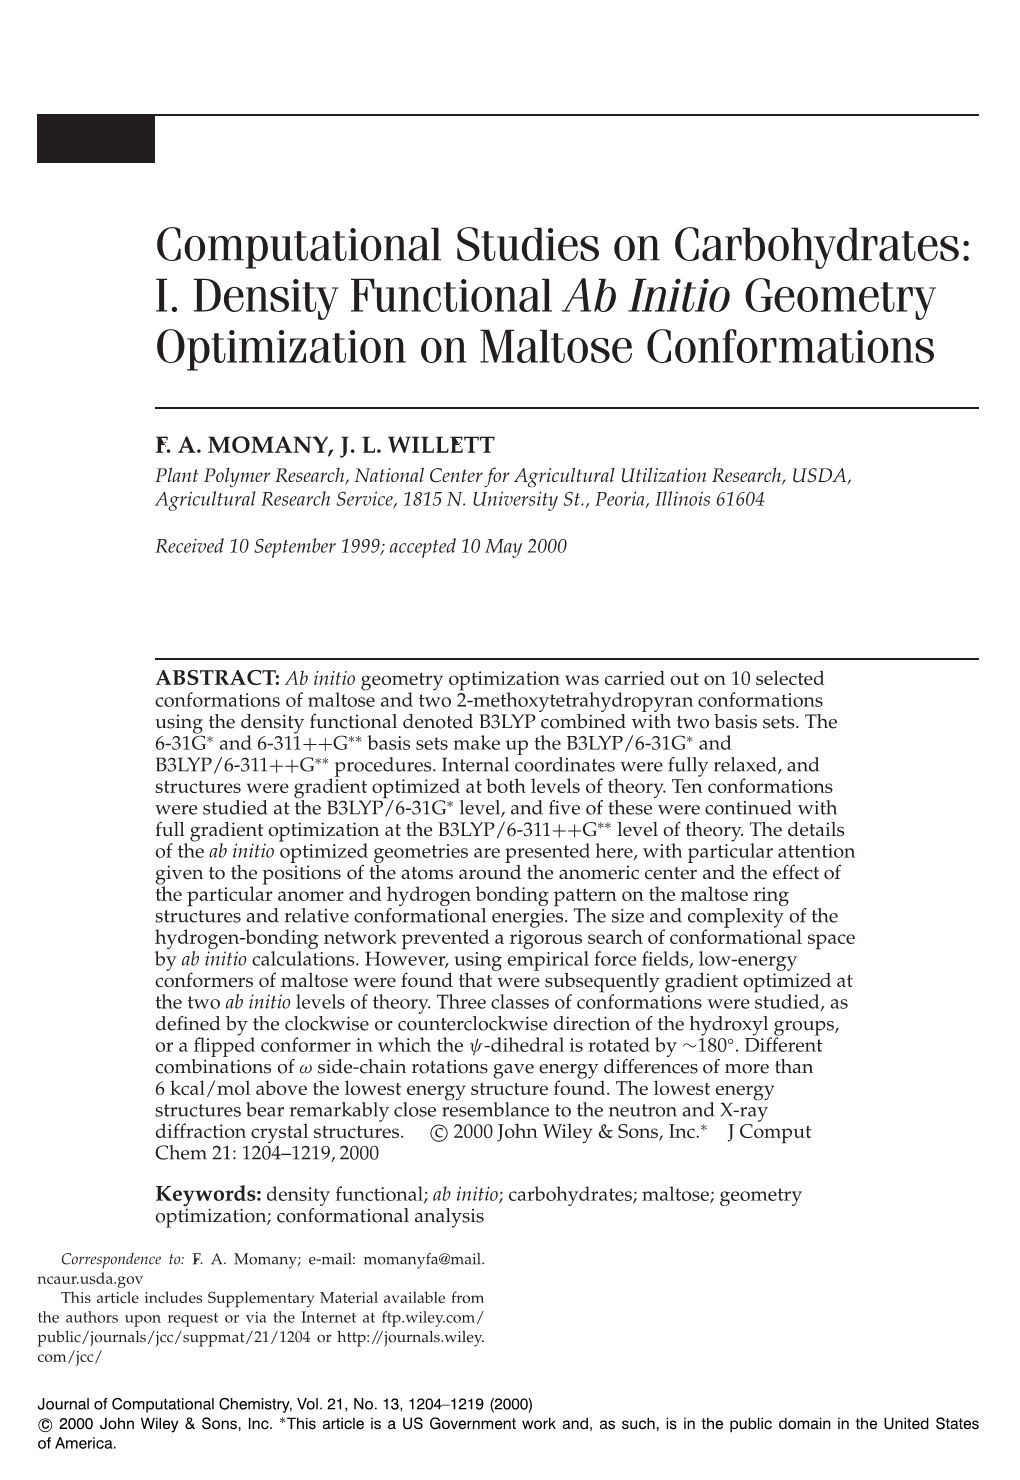 Computational Studies on Carbohydrates: I. Density Functional Ab Initio Geometry Optimization on Maltose Conformations